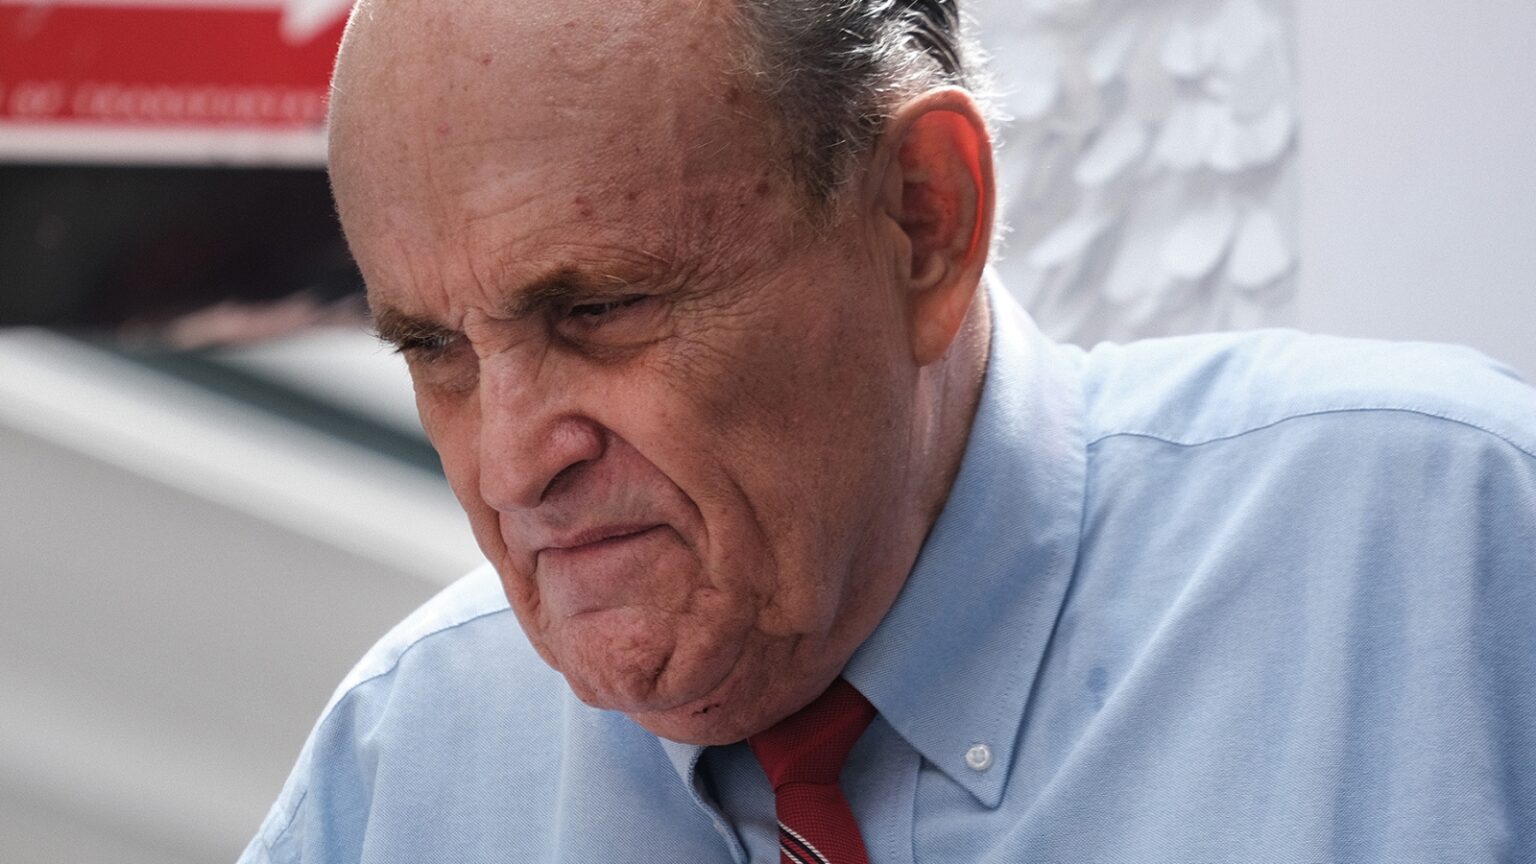 Rudy Giuliani Responds to Allegations of Sexuality